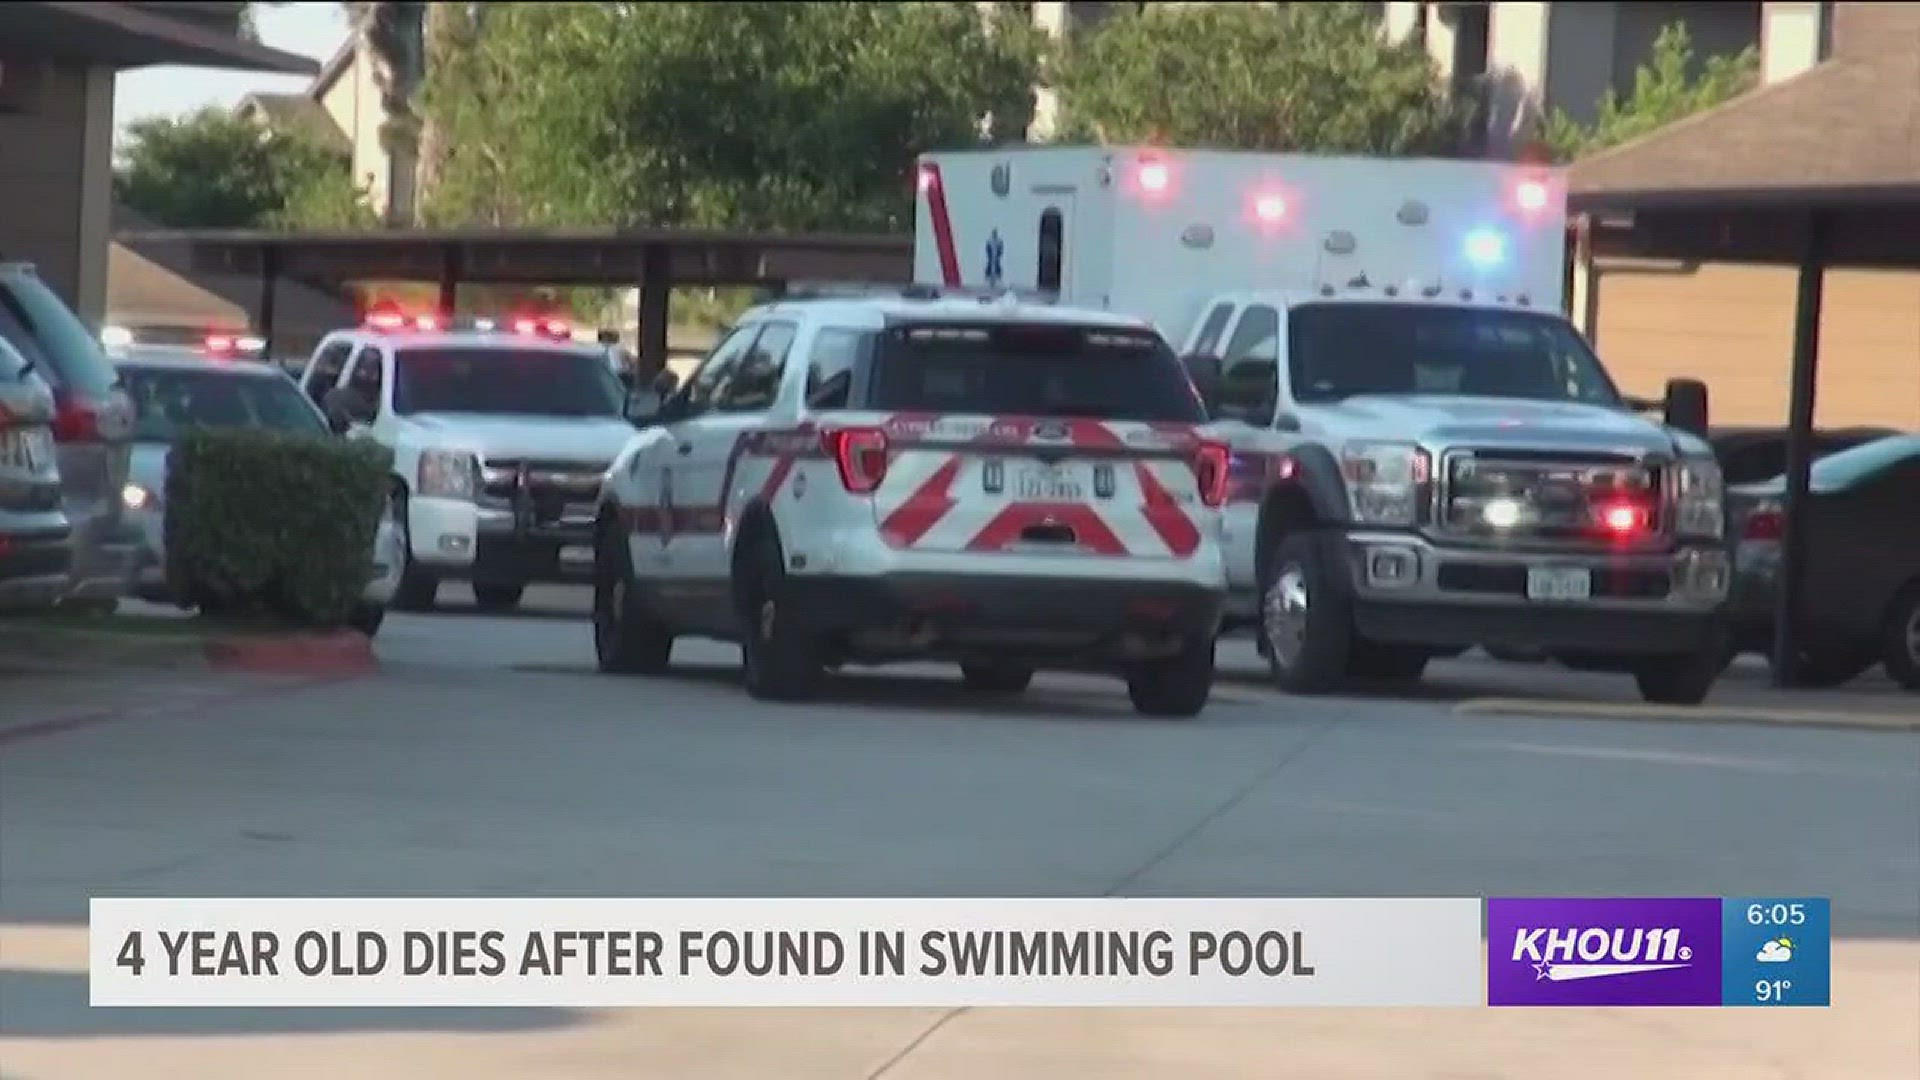 KHOU 11 Top Headlines at 6 p.m. include United Airlines passengers panic when plane loses cabin pressure, Santa Fe High School students return to school and a 4-year-old dies after found in swimming pool.